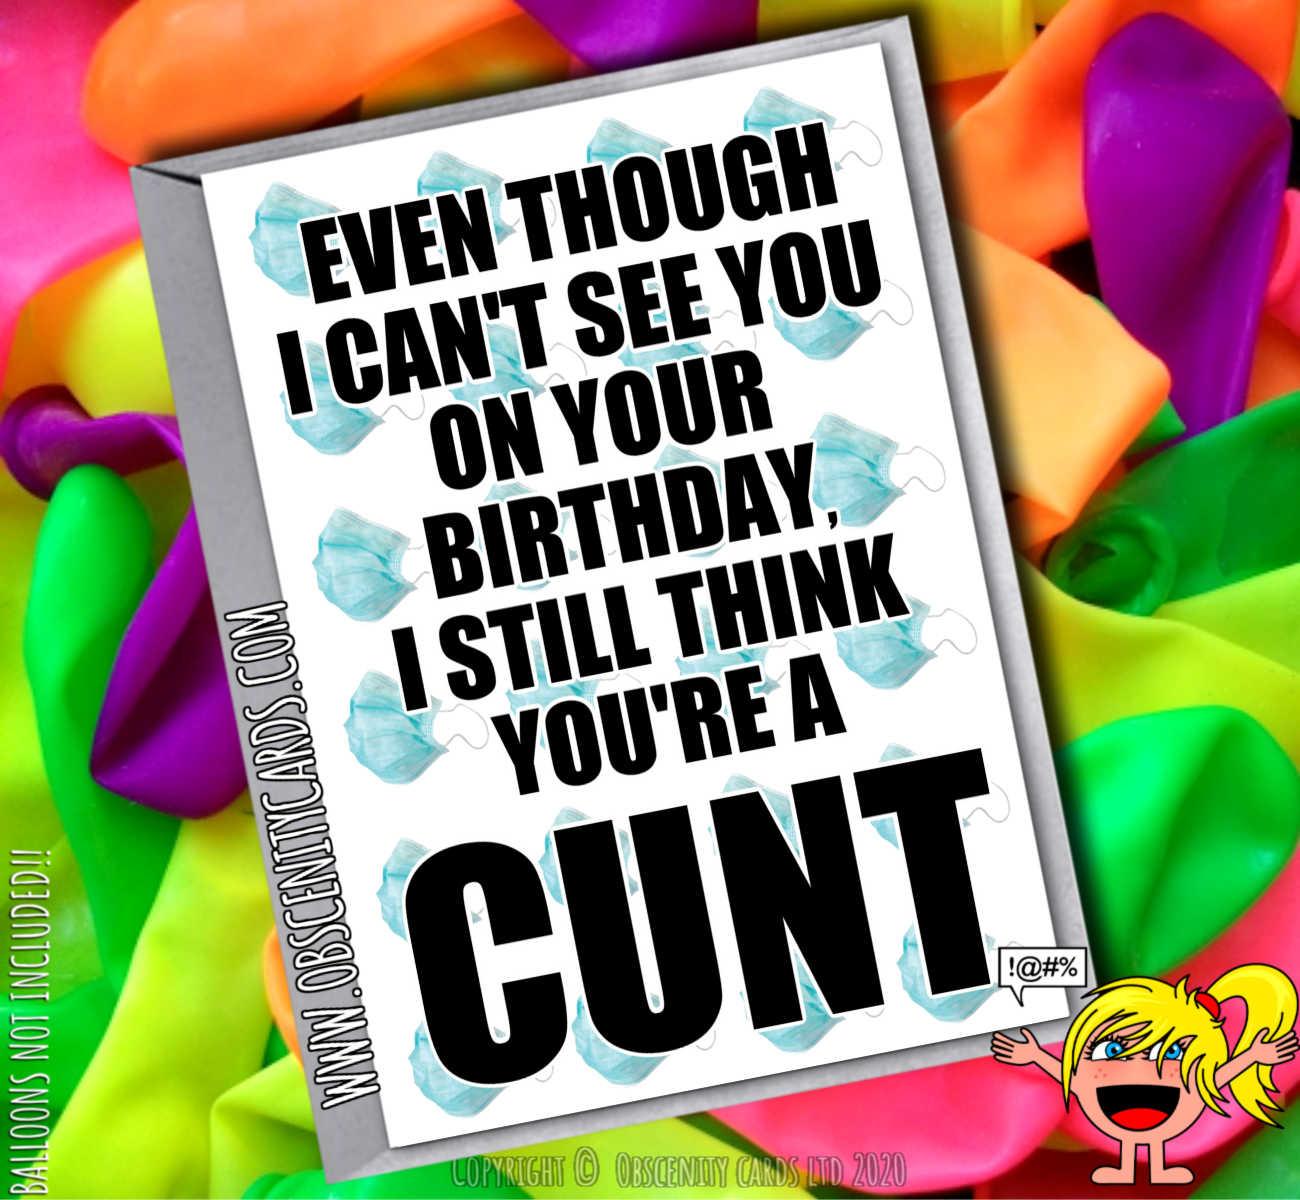 EVEN THOUGH I CAN'T SEE YOU ON YOUR BIRTHDAY I STILL THINK YOU'RE A CUNT SELF ISOLATION CARD